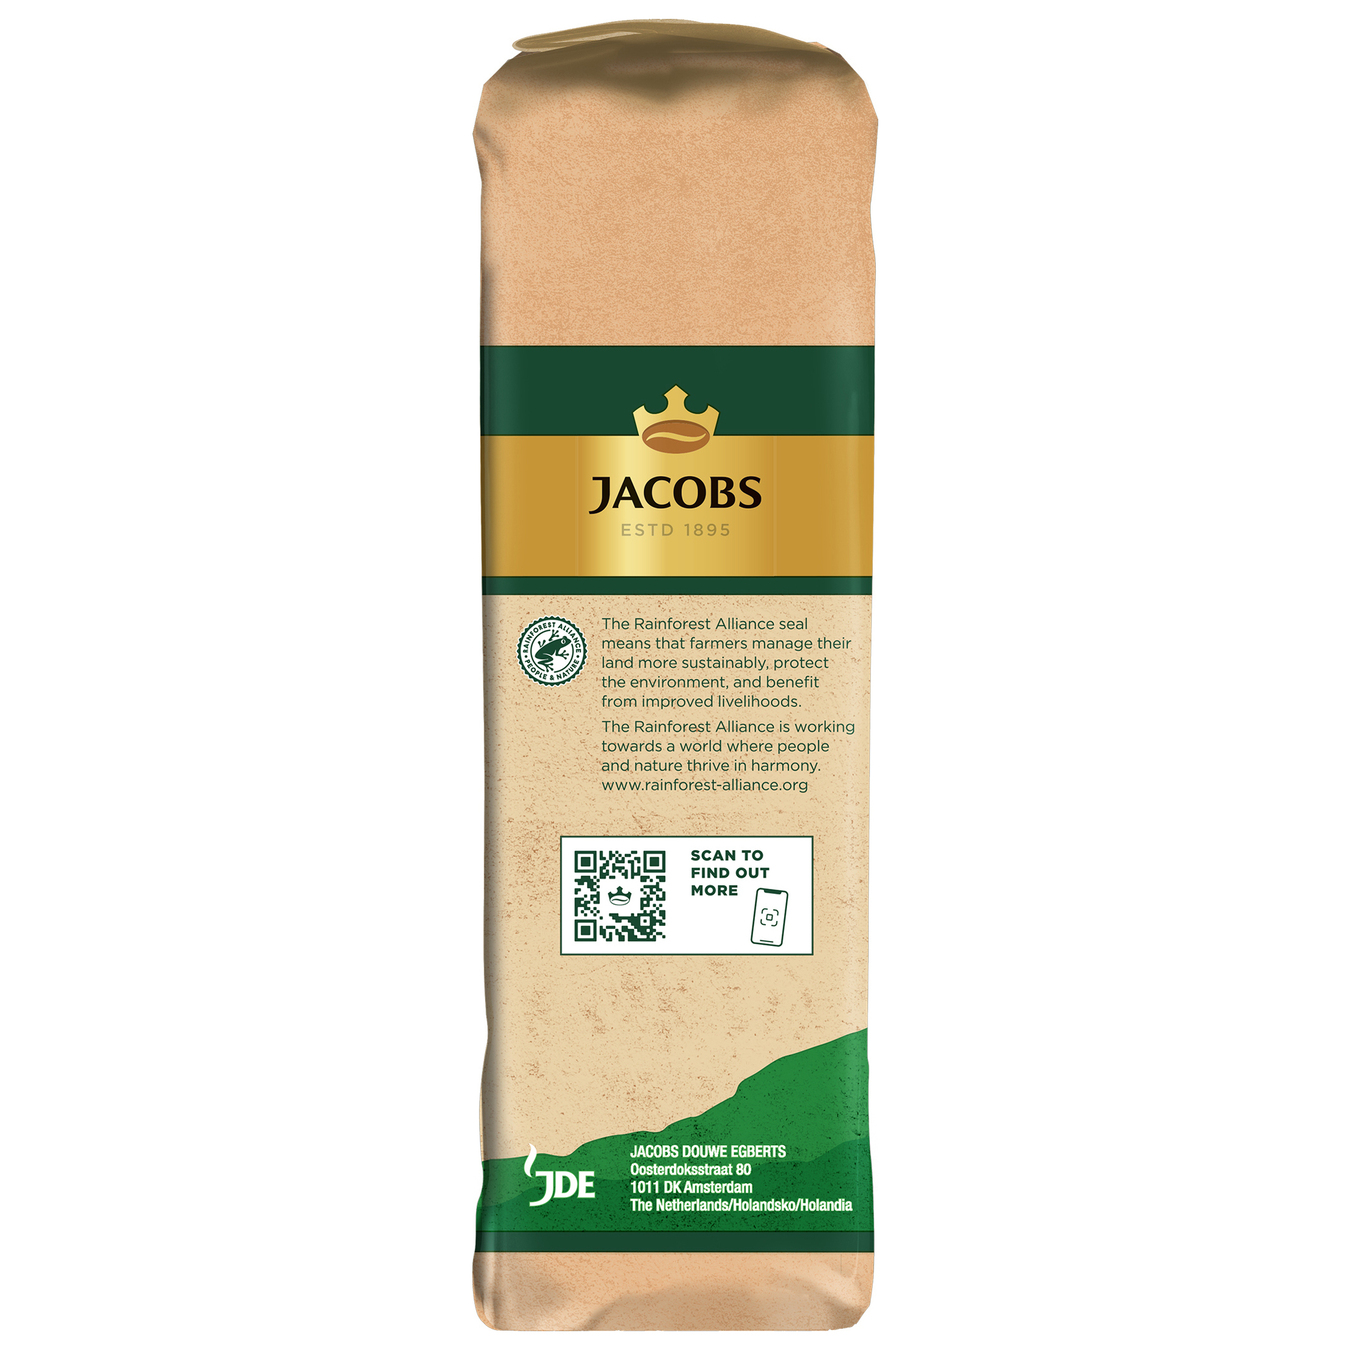 Natural coffee Jacobs Brazil roasted in beans 1kg 3